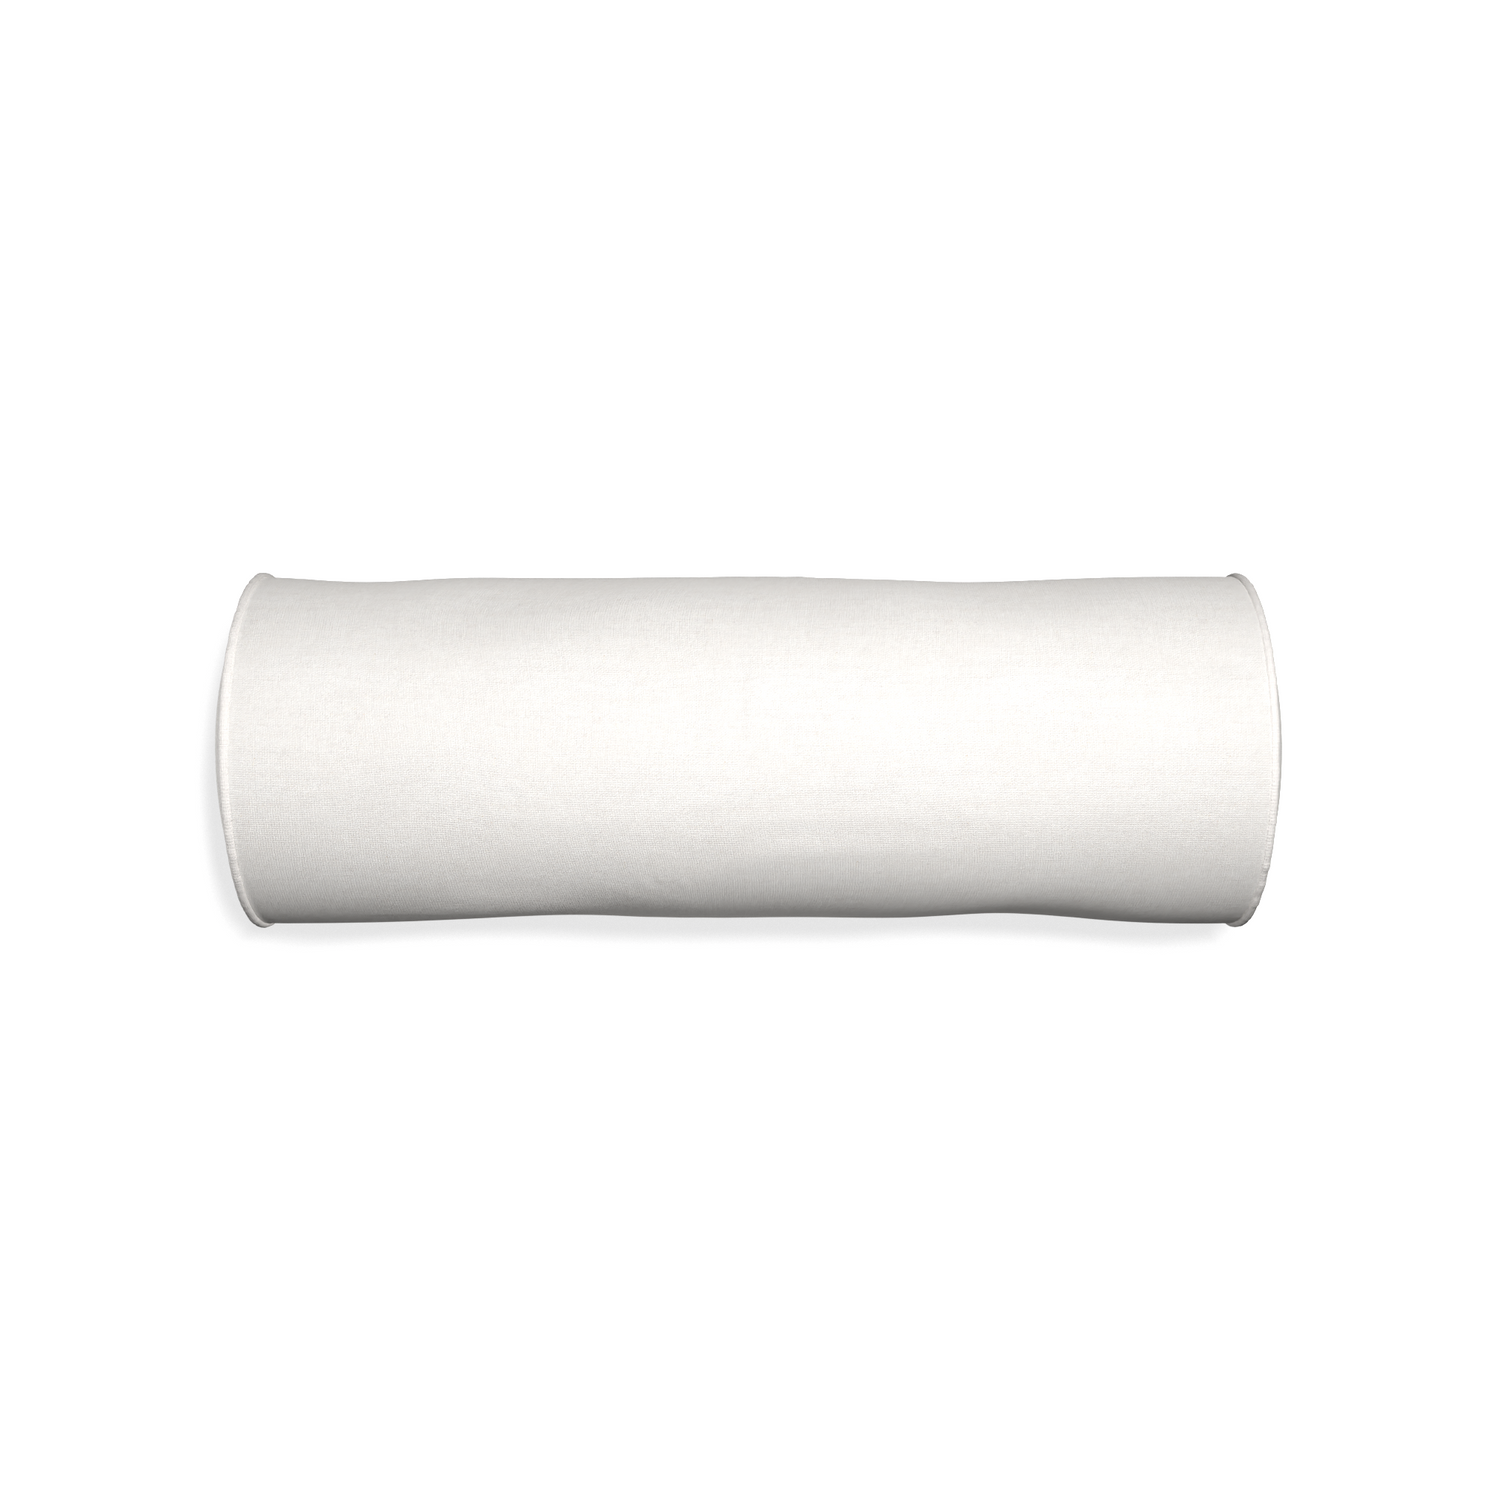 Bolster flour custom natural whitepillow with snow piping on white background